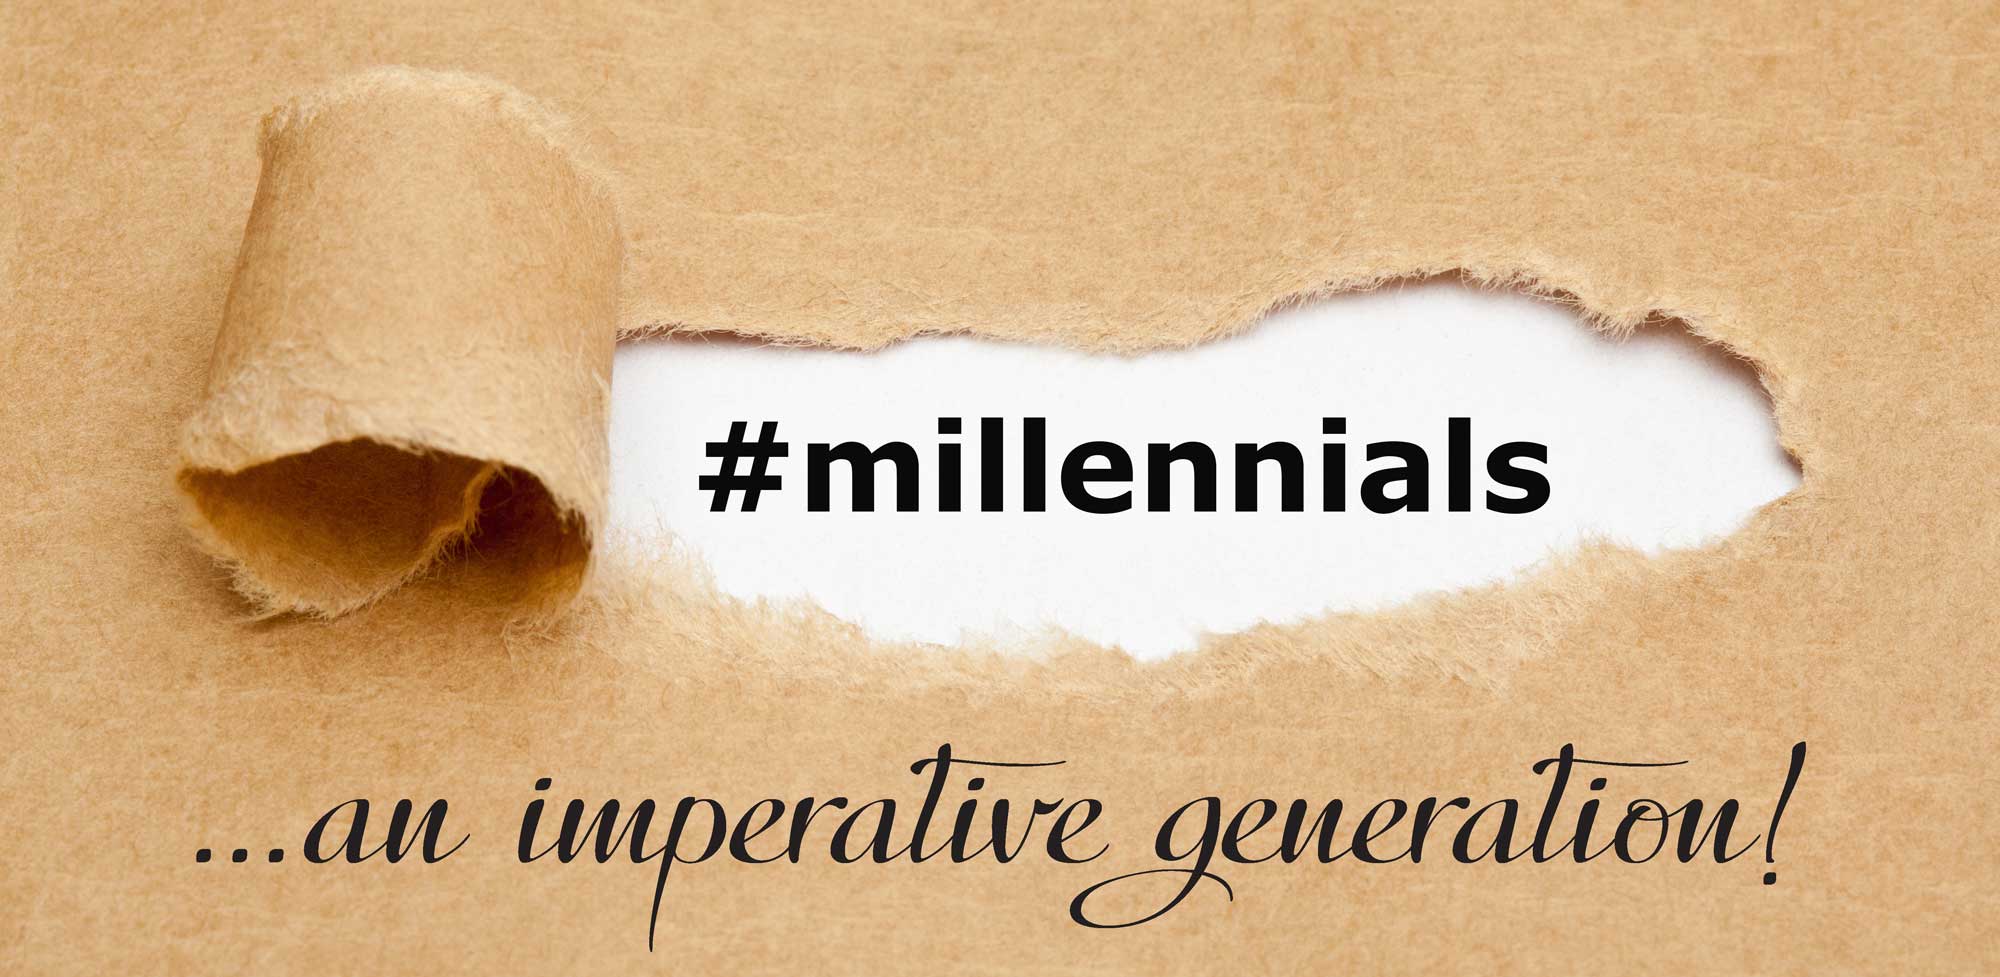 Millennials need for the mutual insurance industry